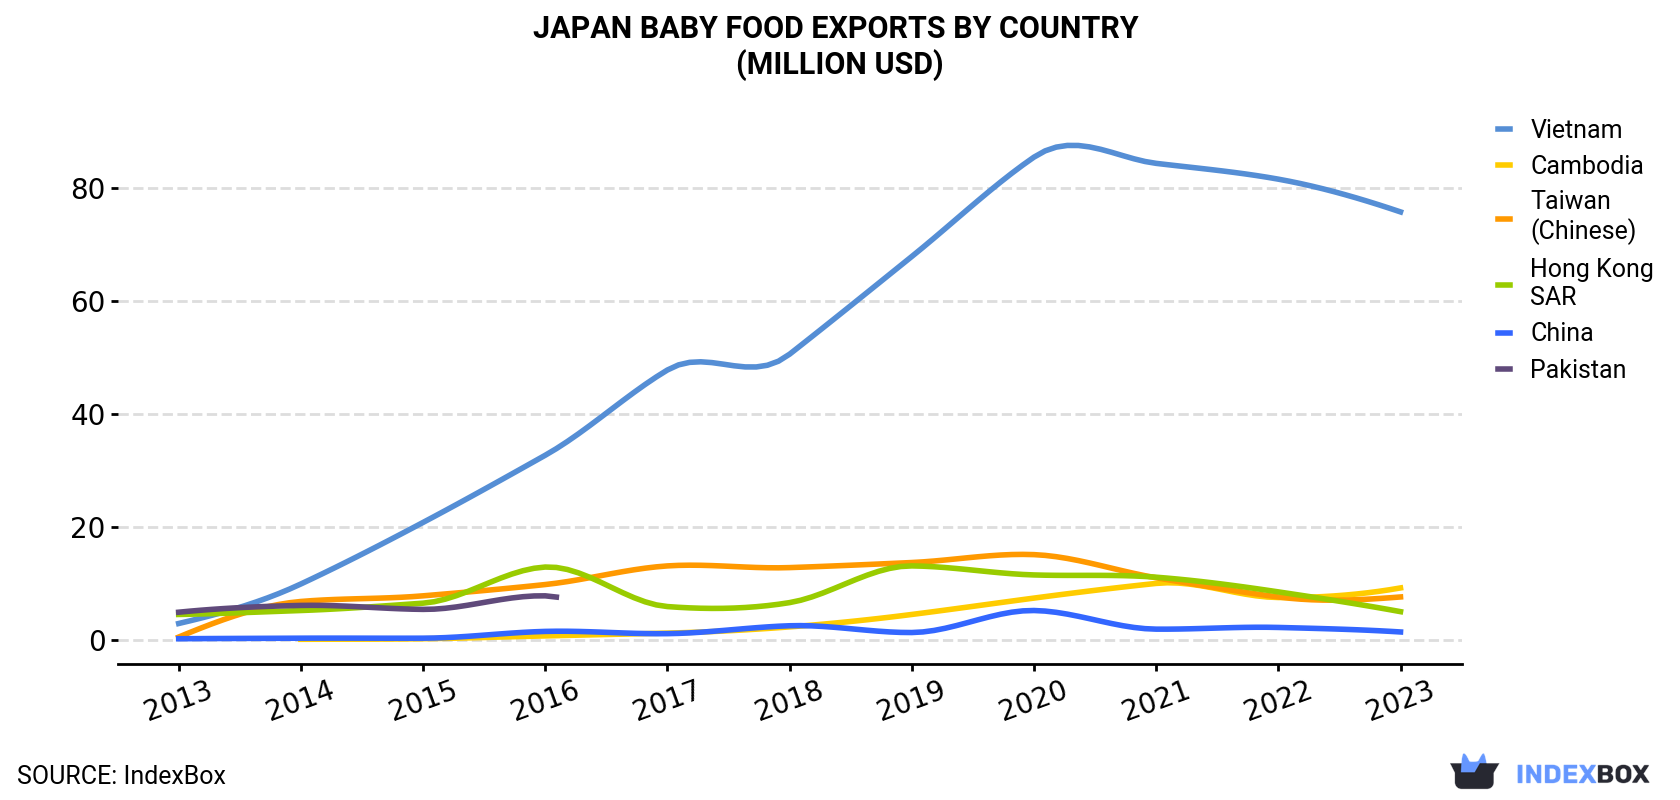 Japan Baby Food Exports By Country (Million USD)